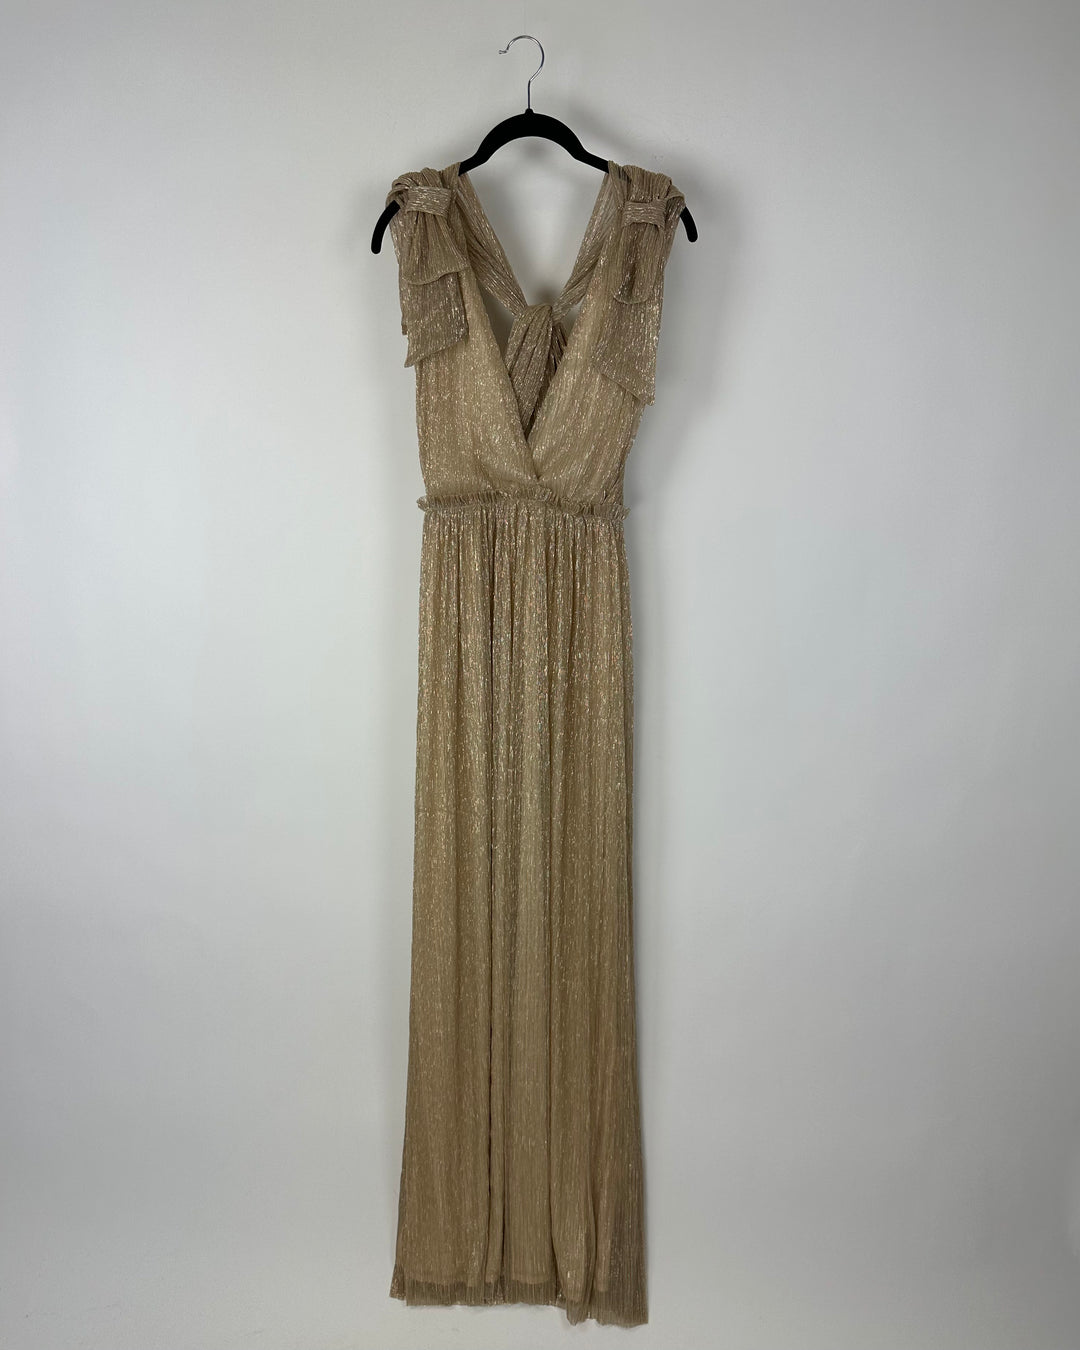 Gold Metallic Tie Shoulder Maxi Dress - Size 0/2 and 2/4